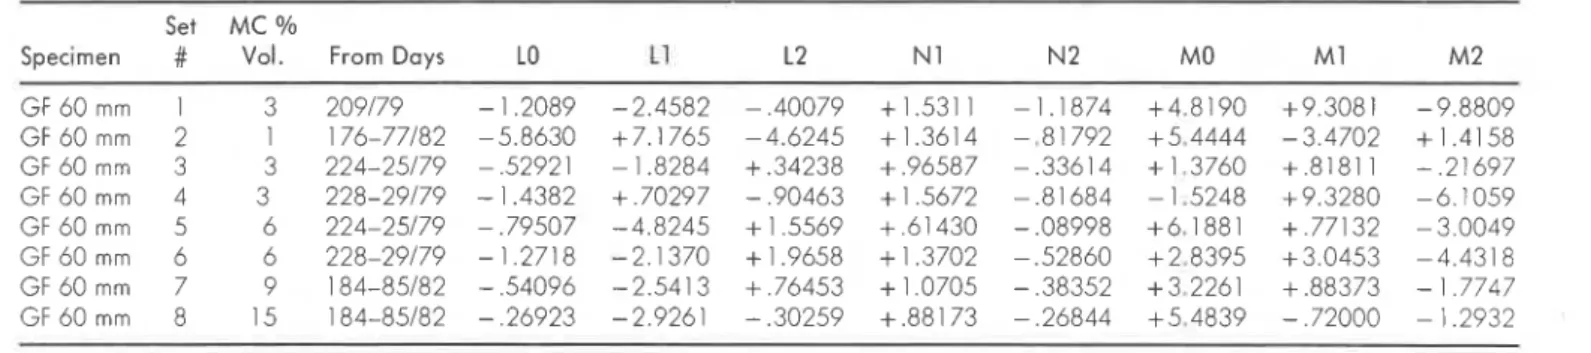 Table  2.  Latent  heat transfer  coefficients for  wet glass  fiber specimens, calculated  using  24  datasetslday from  the days  indicated in  Col